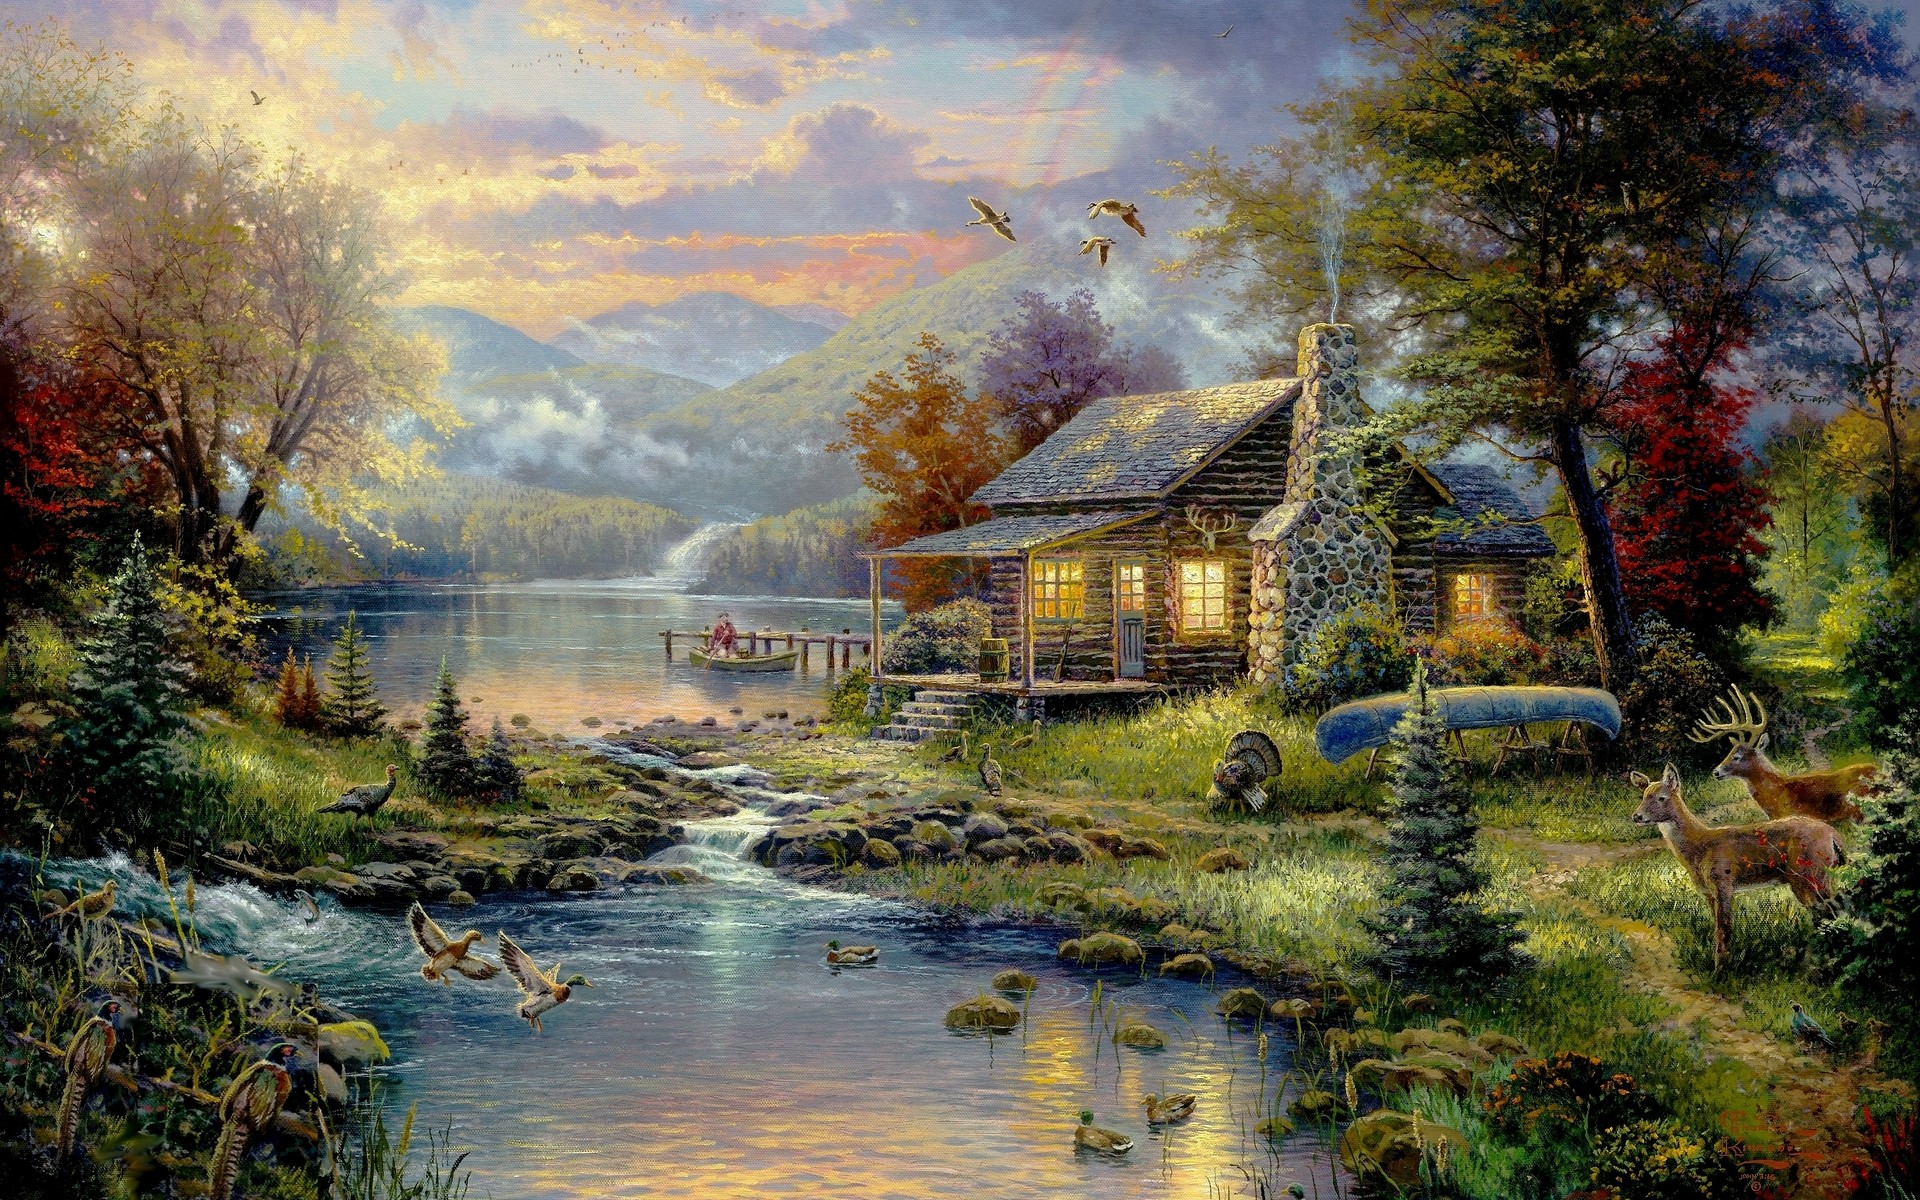 1920x1200 Thomas Kinkade Painting Wallpapers) – Free Backgrounds and Wallpapers